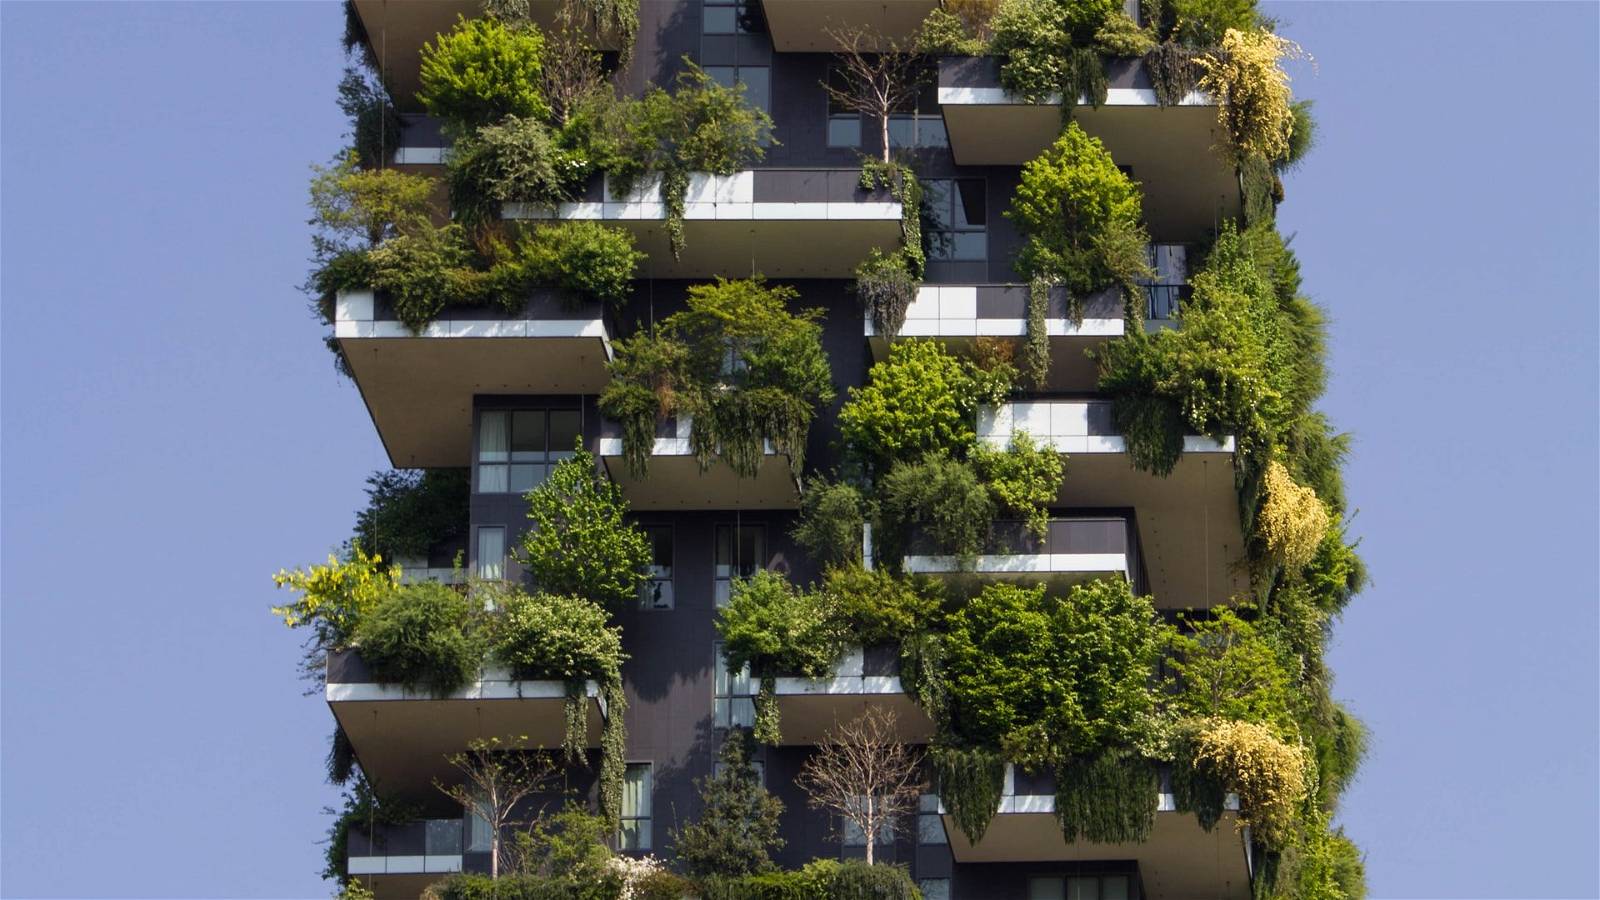 Bioclimatic Architecture Is there a way that a large city turns greener and sustainable?